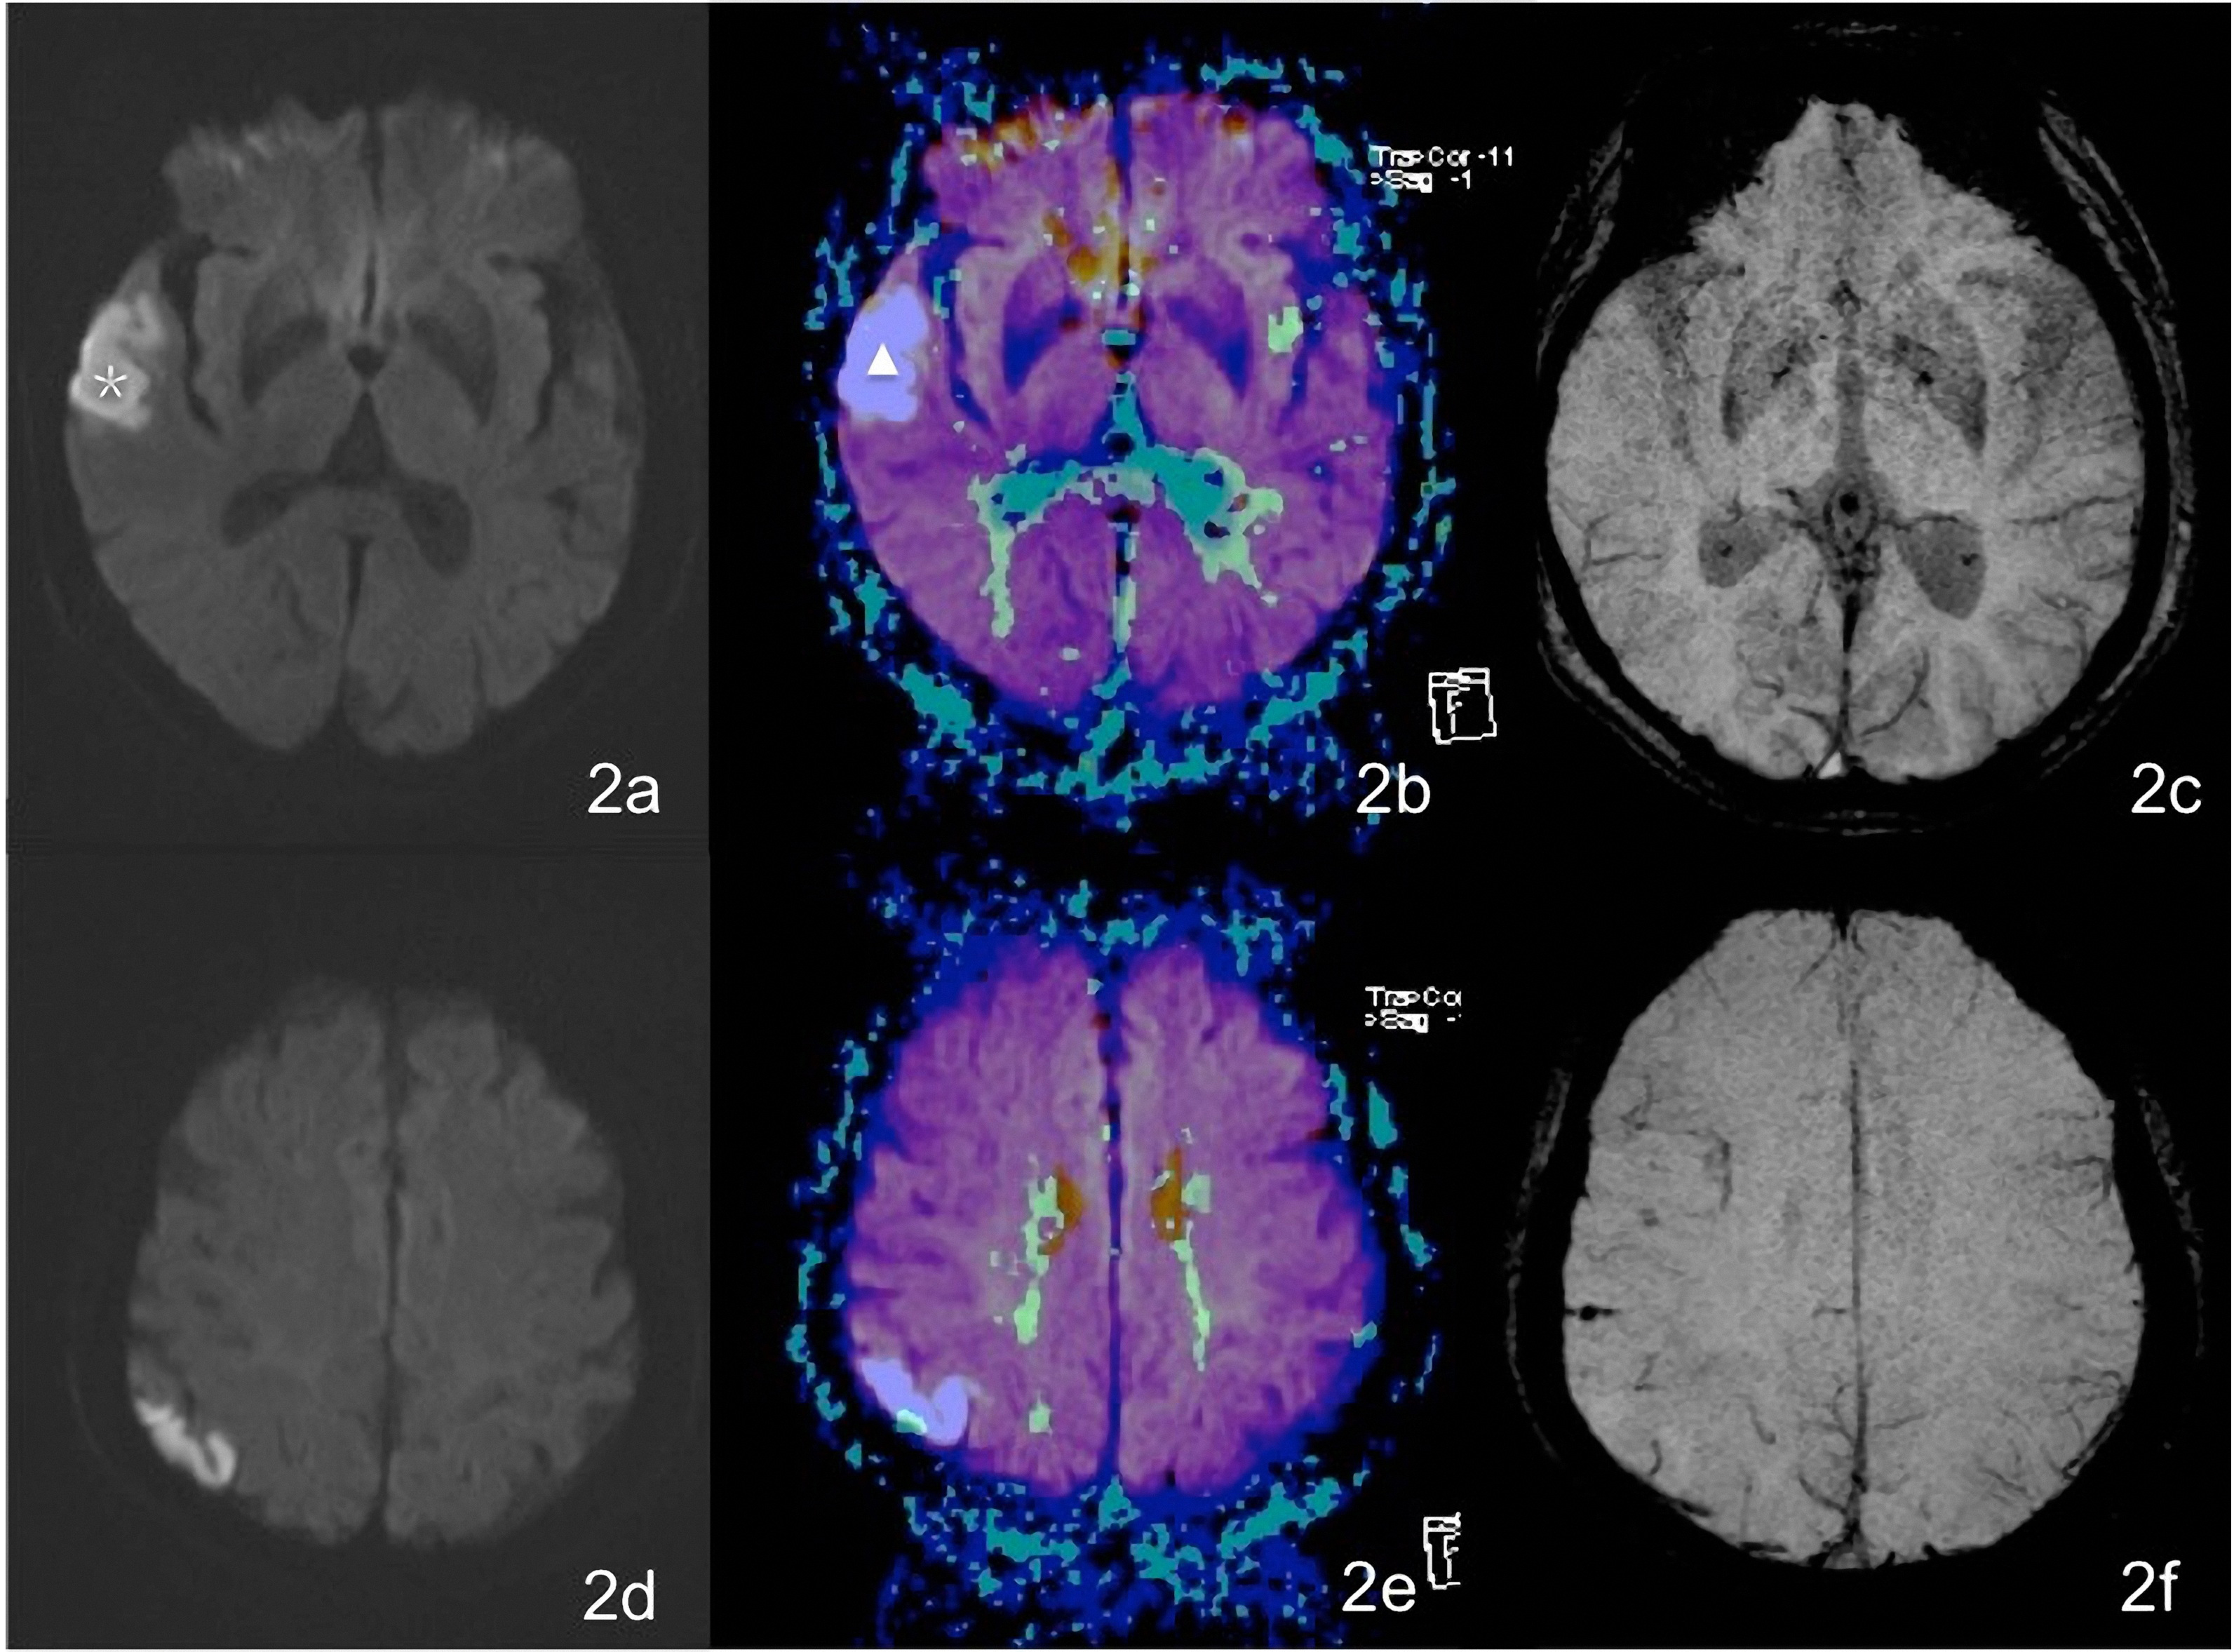 A female patient aged 76 years complains of vague speech for 46 hours. Figures 2a and 2d show patchy hyperintensity on a DWI of the right temporal lobe and occipital lobe. In Figs 2b and 2e, the white Δ indicates an area with an abnormal MTT signal within an area detected by a DWI superimposed on it. In Figs 2c and 2f, the black  indicates an area of DWI-detected hyperintensity with no increase in the number of small veins seen on superposed images of the SWI minIP and DWI. 